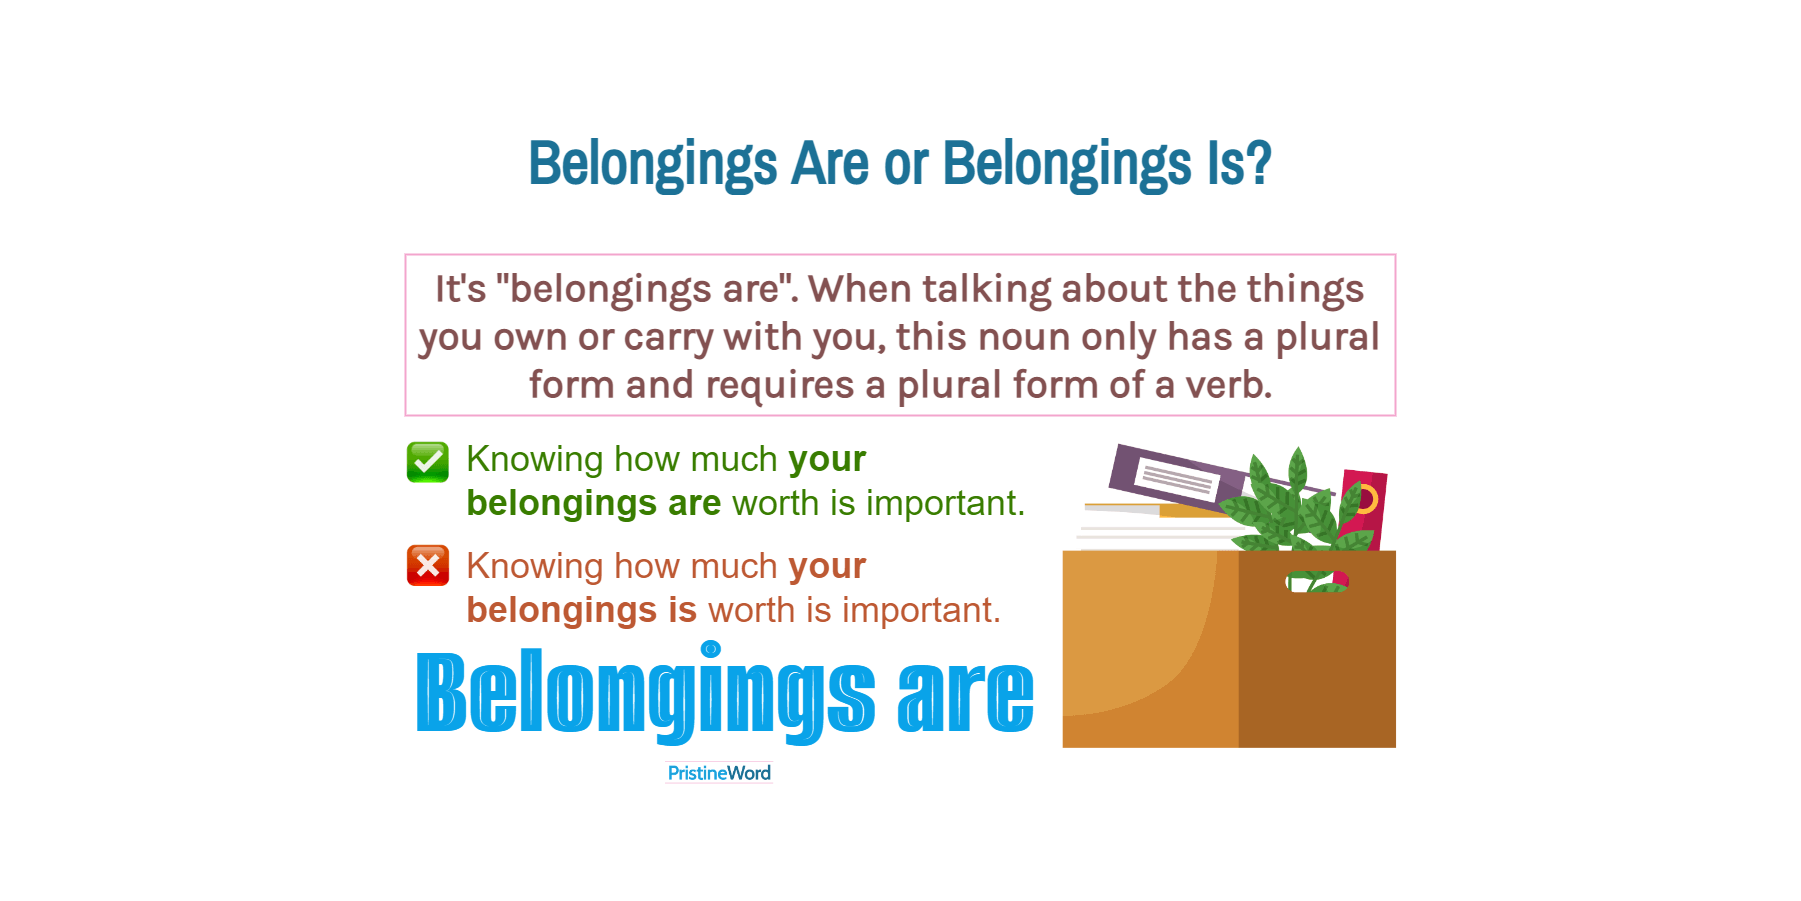 Belongings Is or Belongings Are. Which Is Correct?